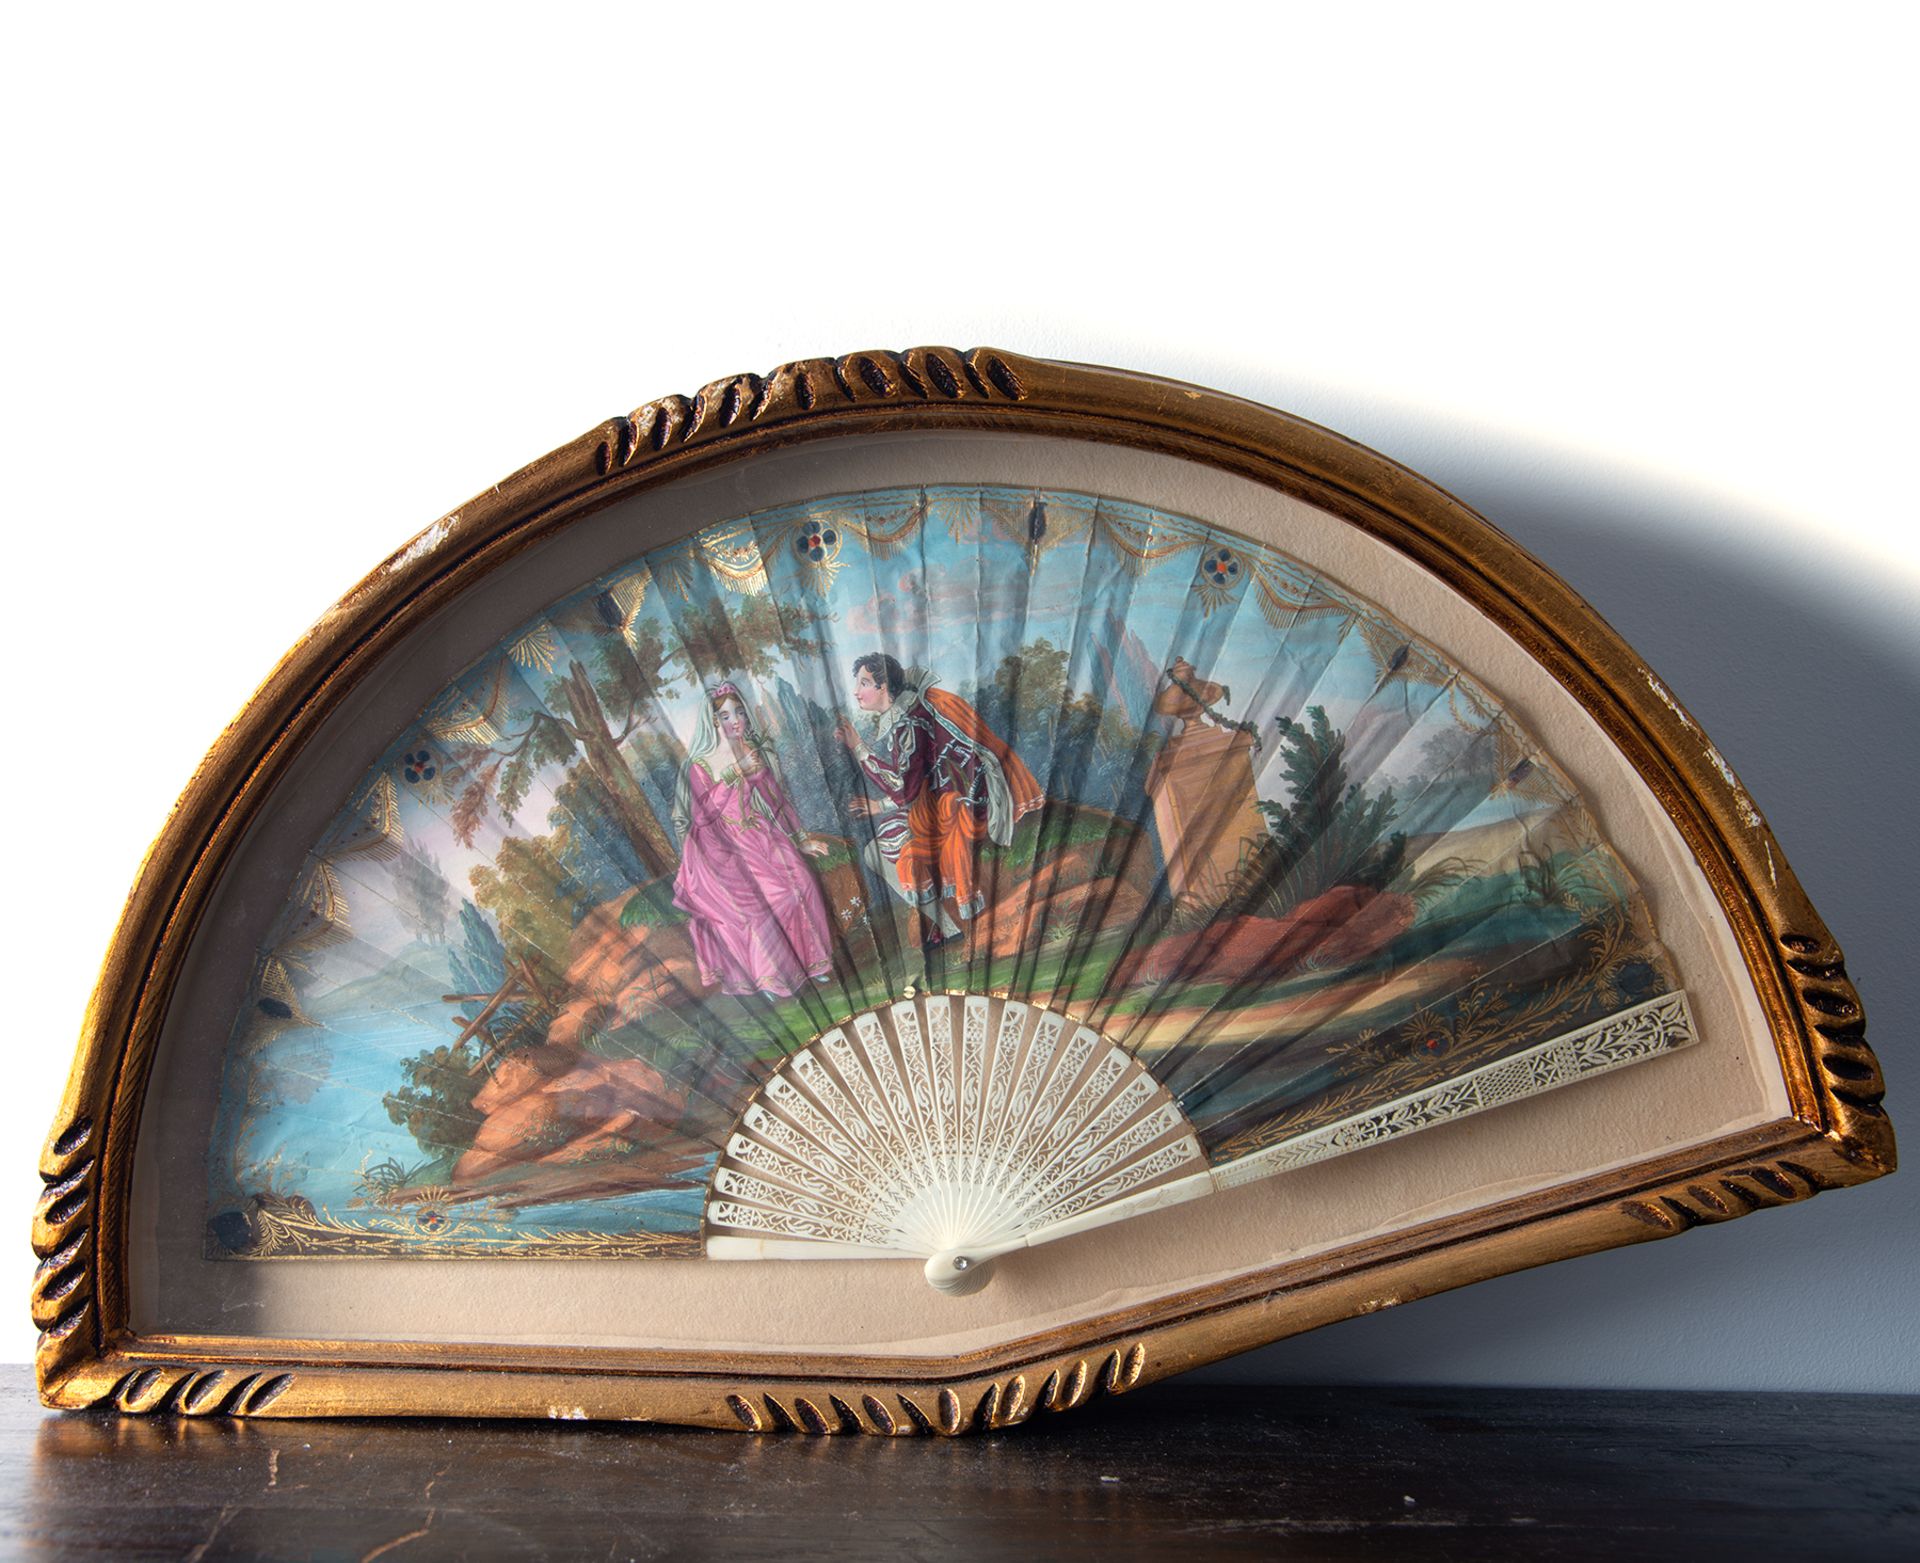 Fan with gallant scene of Romeo and Juliet hand painted in watercolor, 19th century